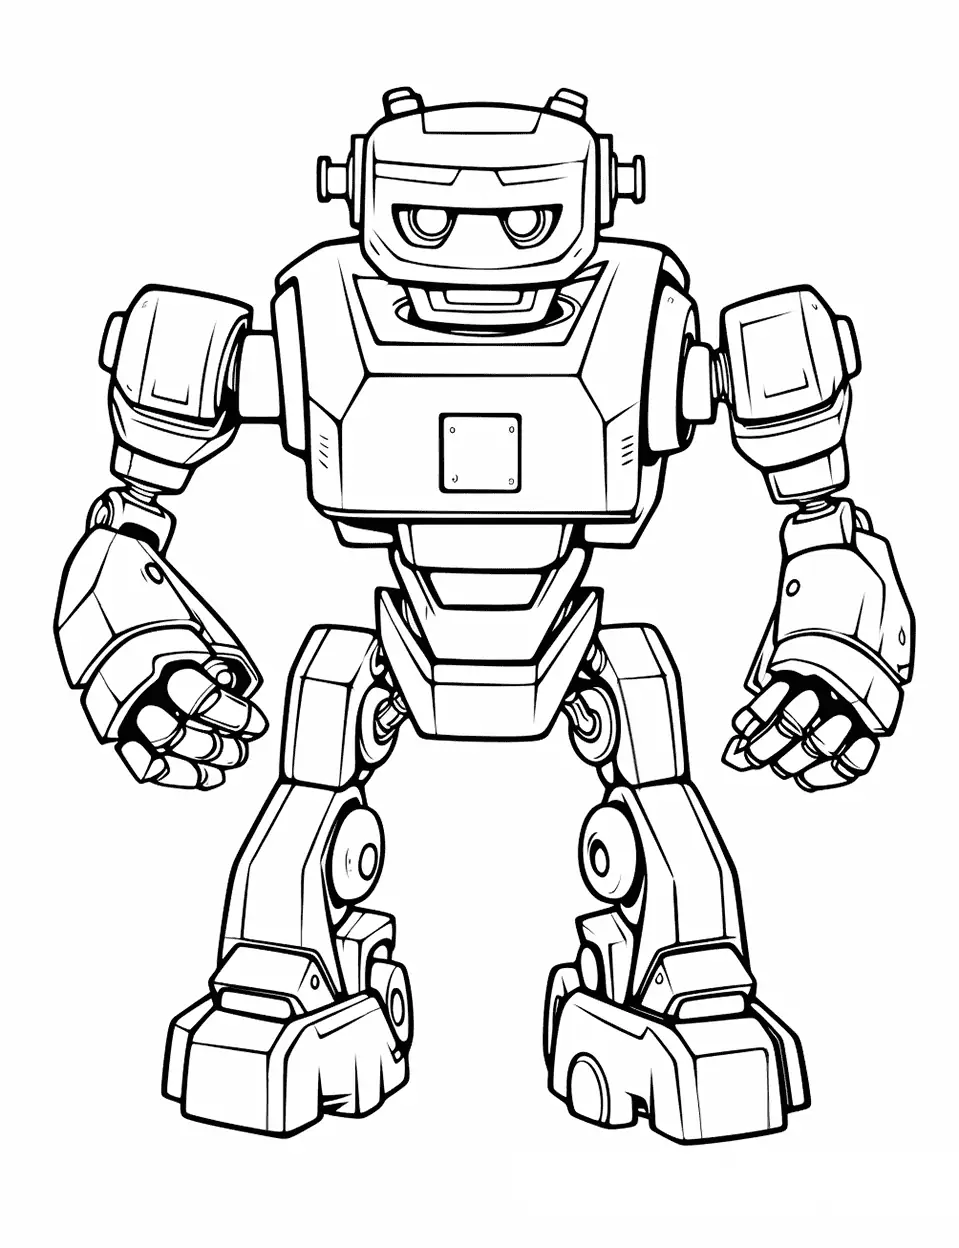 War Robot in Battle Coloring Page - A war robot locked in a combat stance.